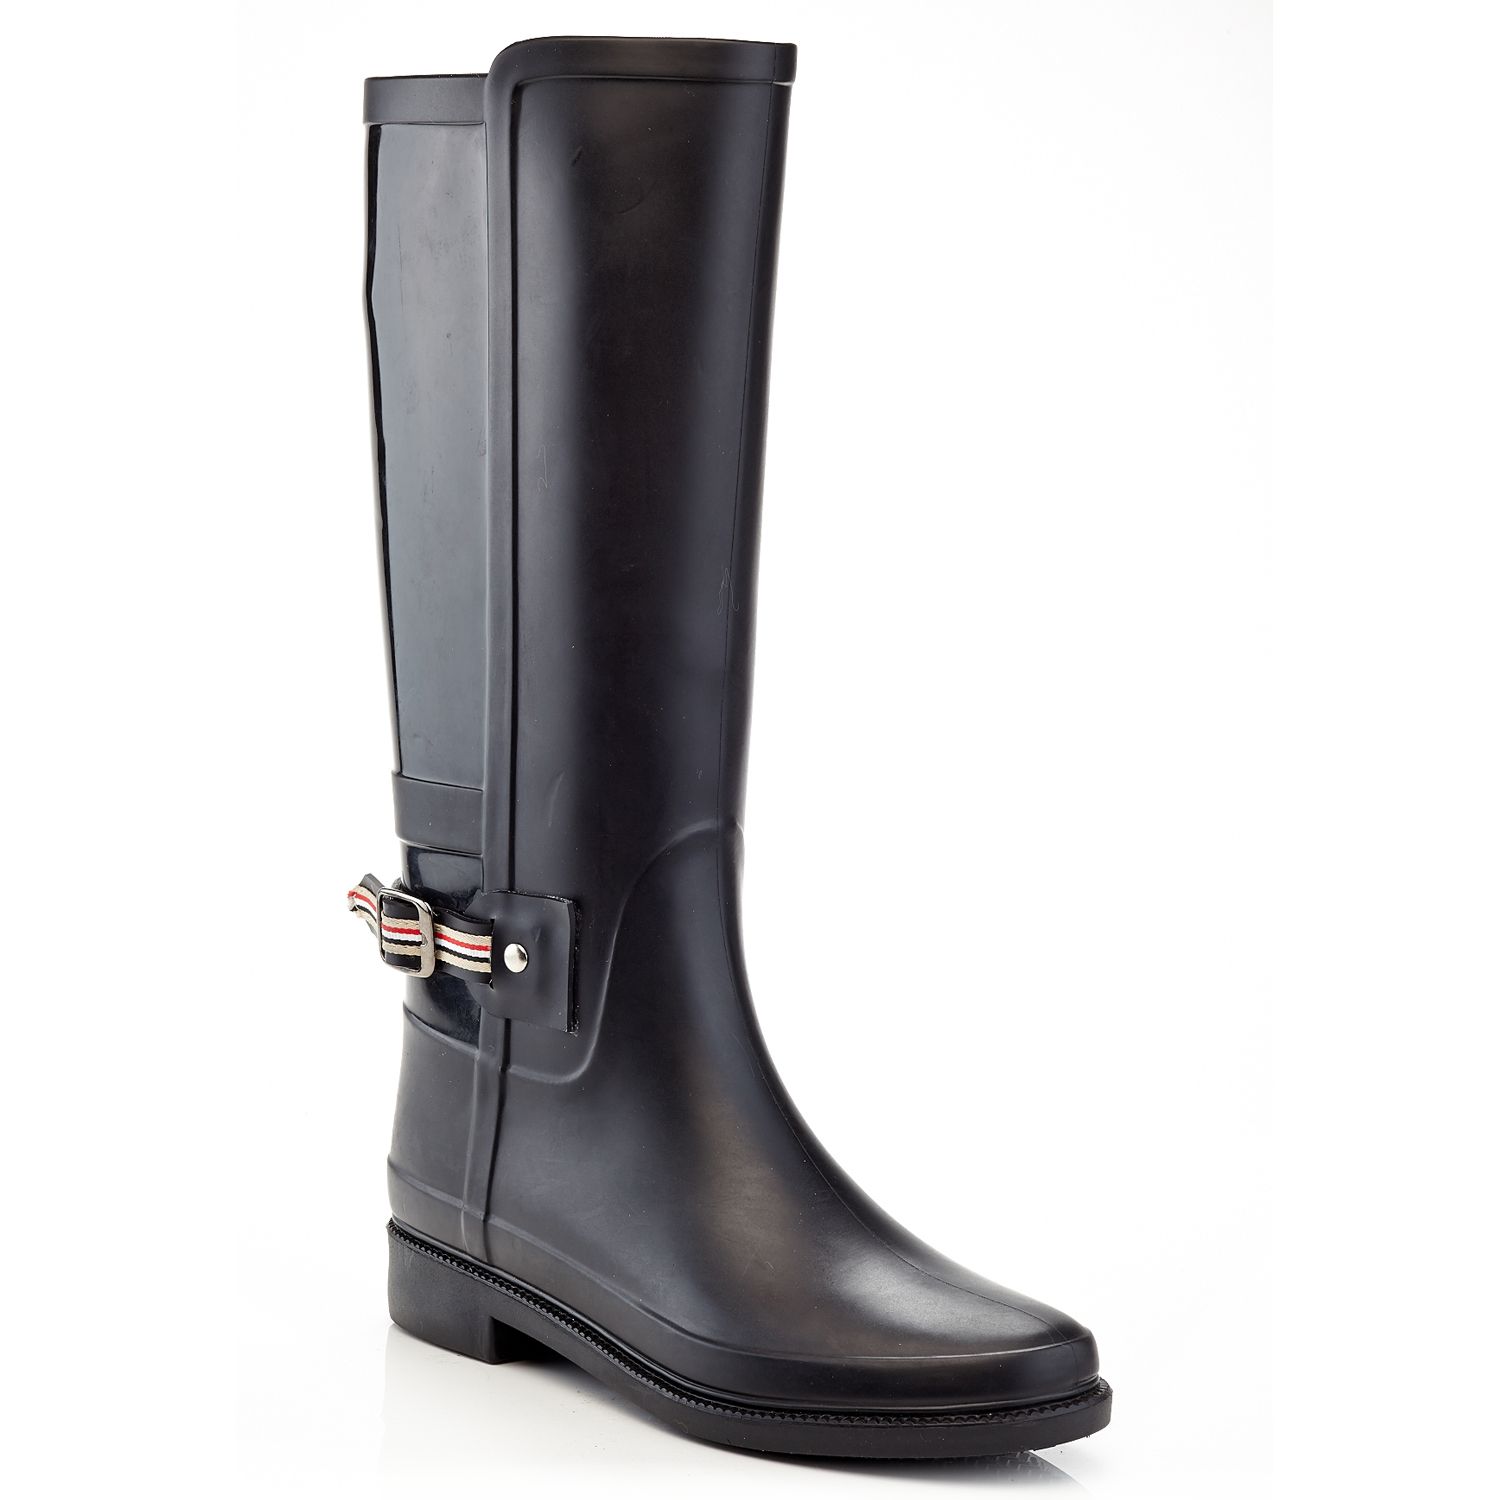 Image for Henry Ferrera England Women's Water-Resistant Rain boots at Kohl's.